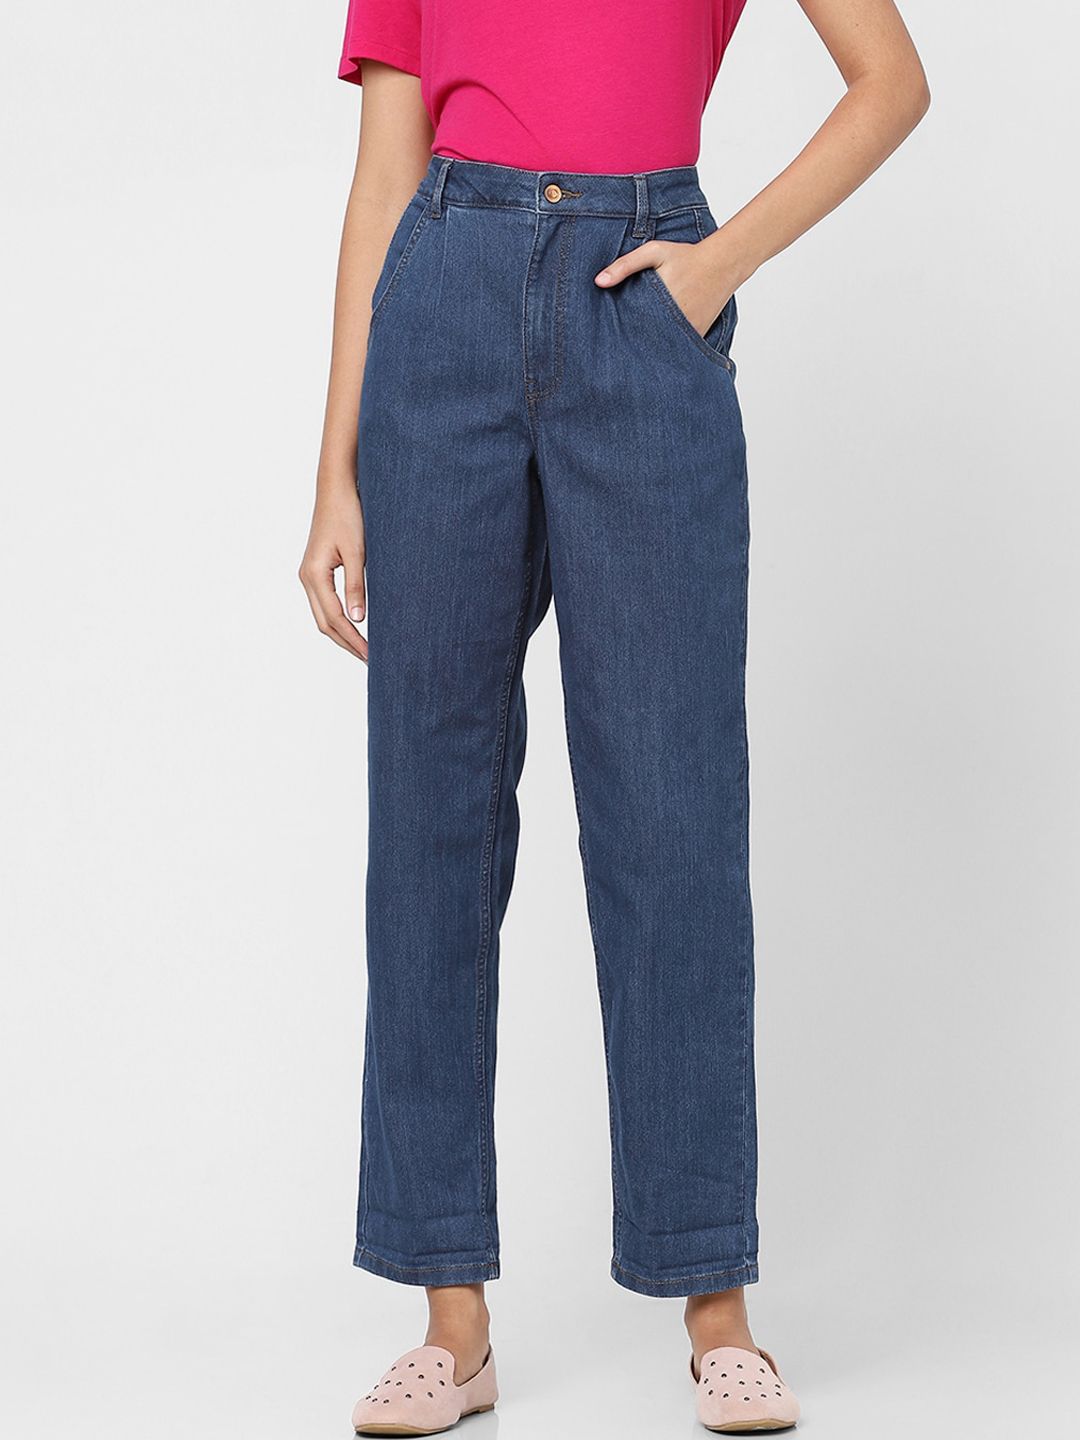 Vero Moda Women Blue Straight Fit High-Rise Jeans Price in India